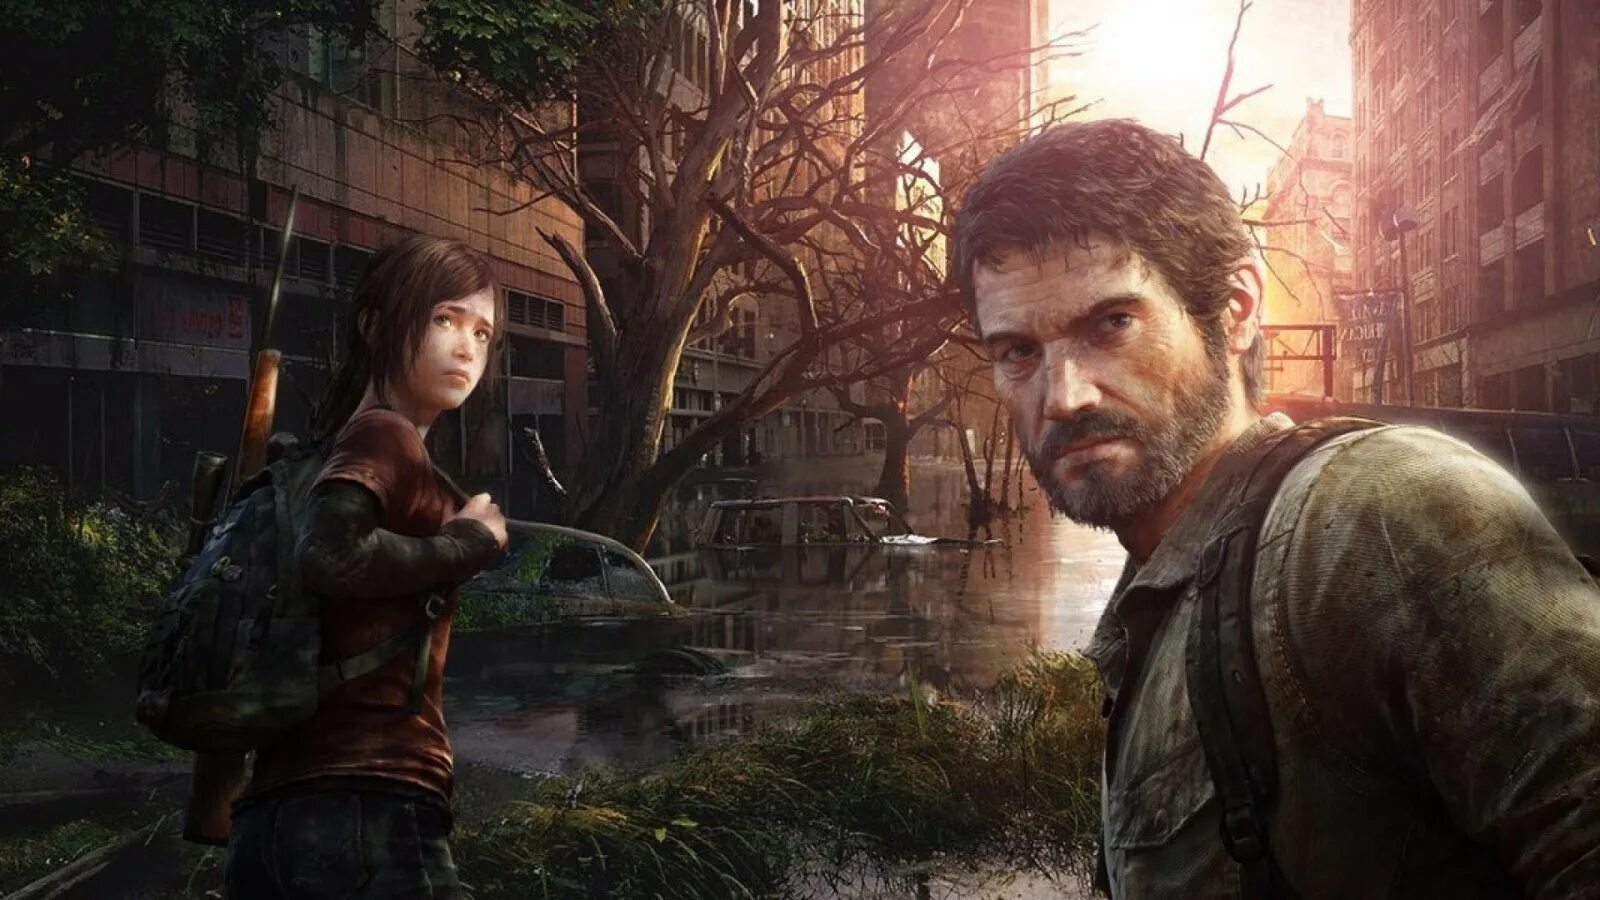 Одни из нас (the last of us) ps4. The last of us ремейк. Джоэл the last of us Remake. Last one game